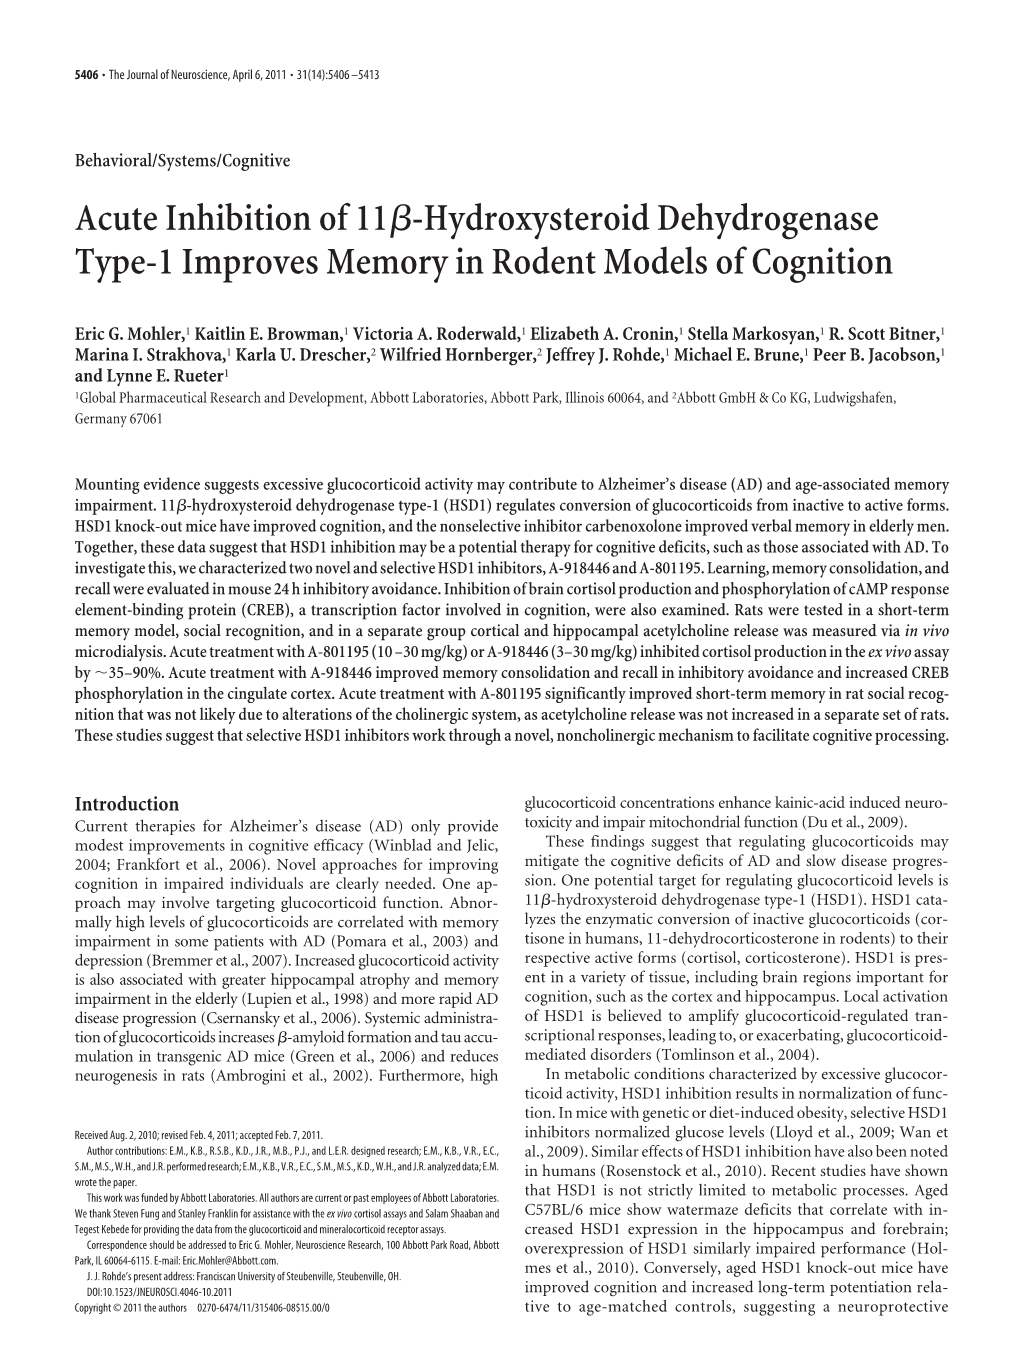 Acute Inhibition of 11ß-Hydroxysteroid